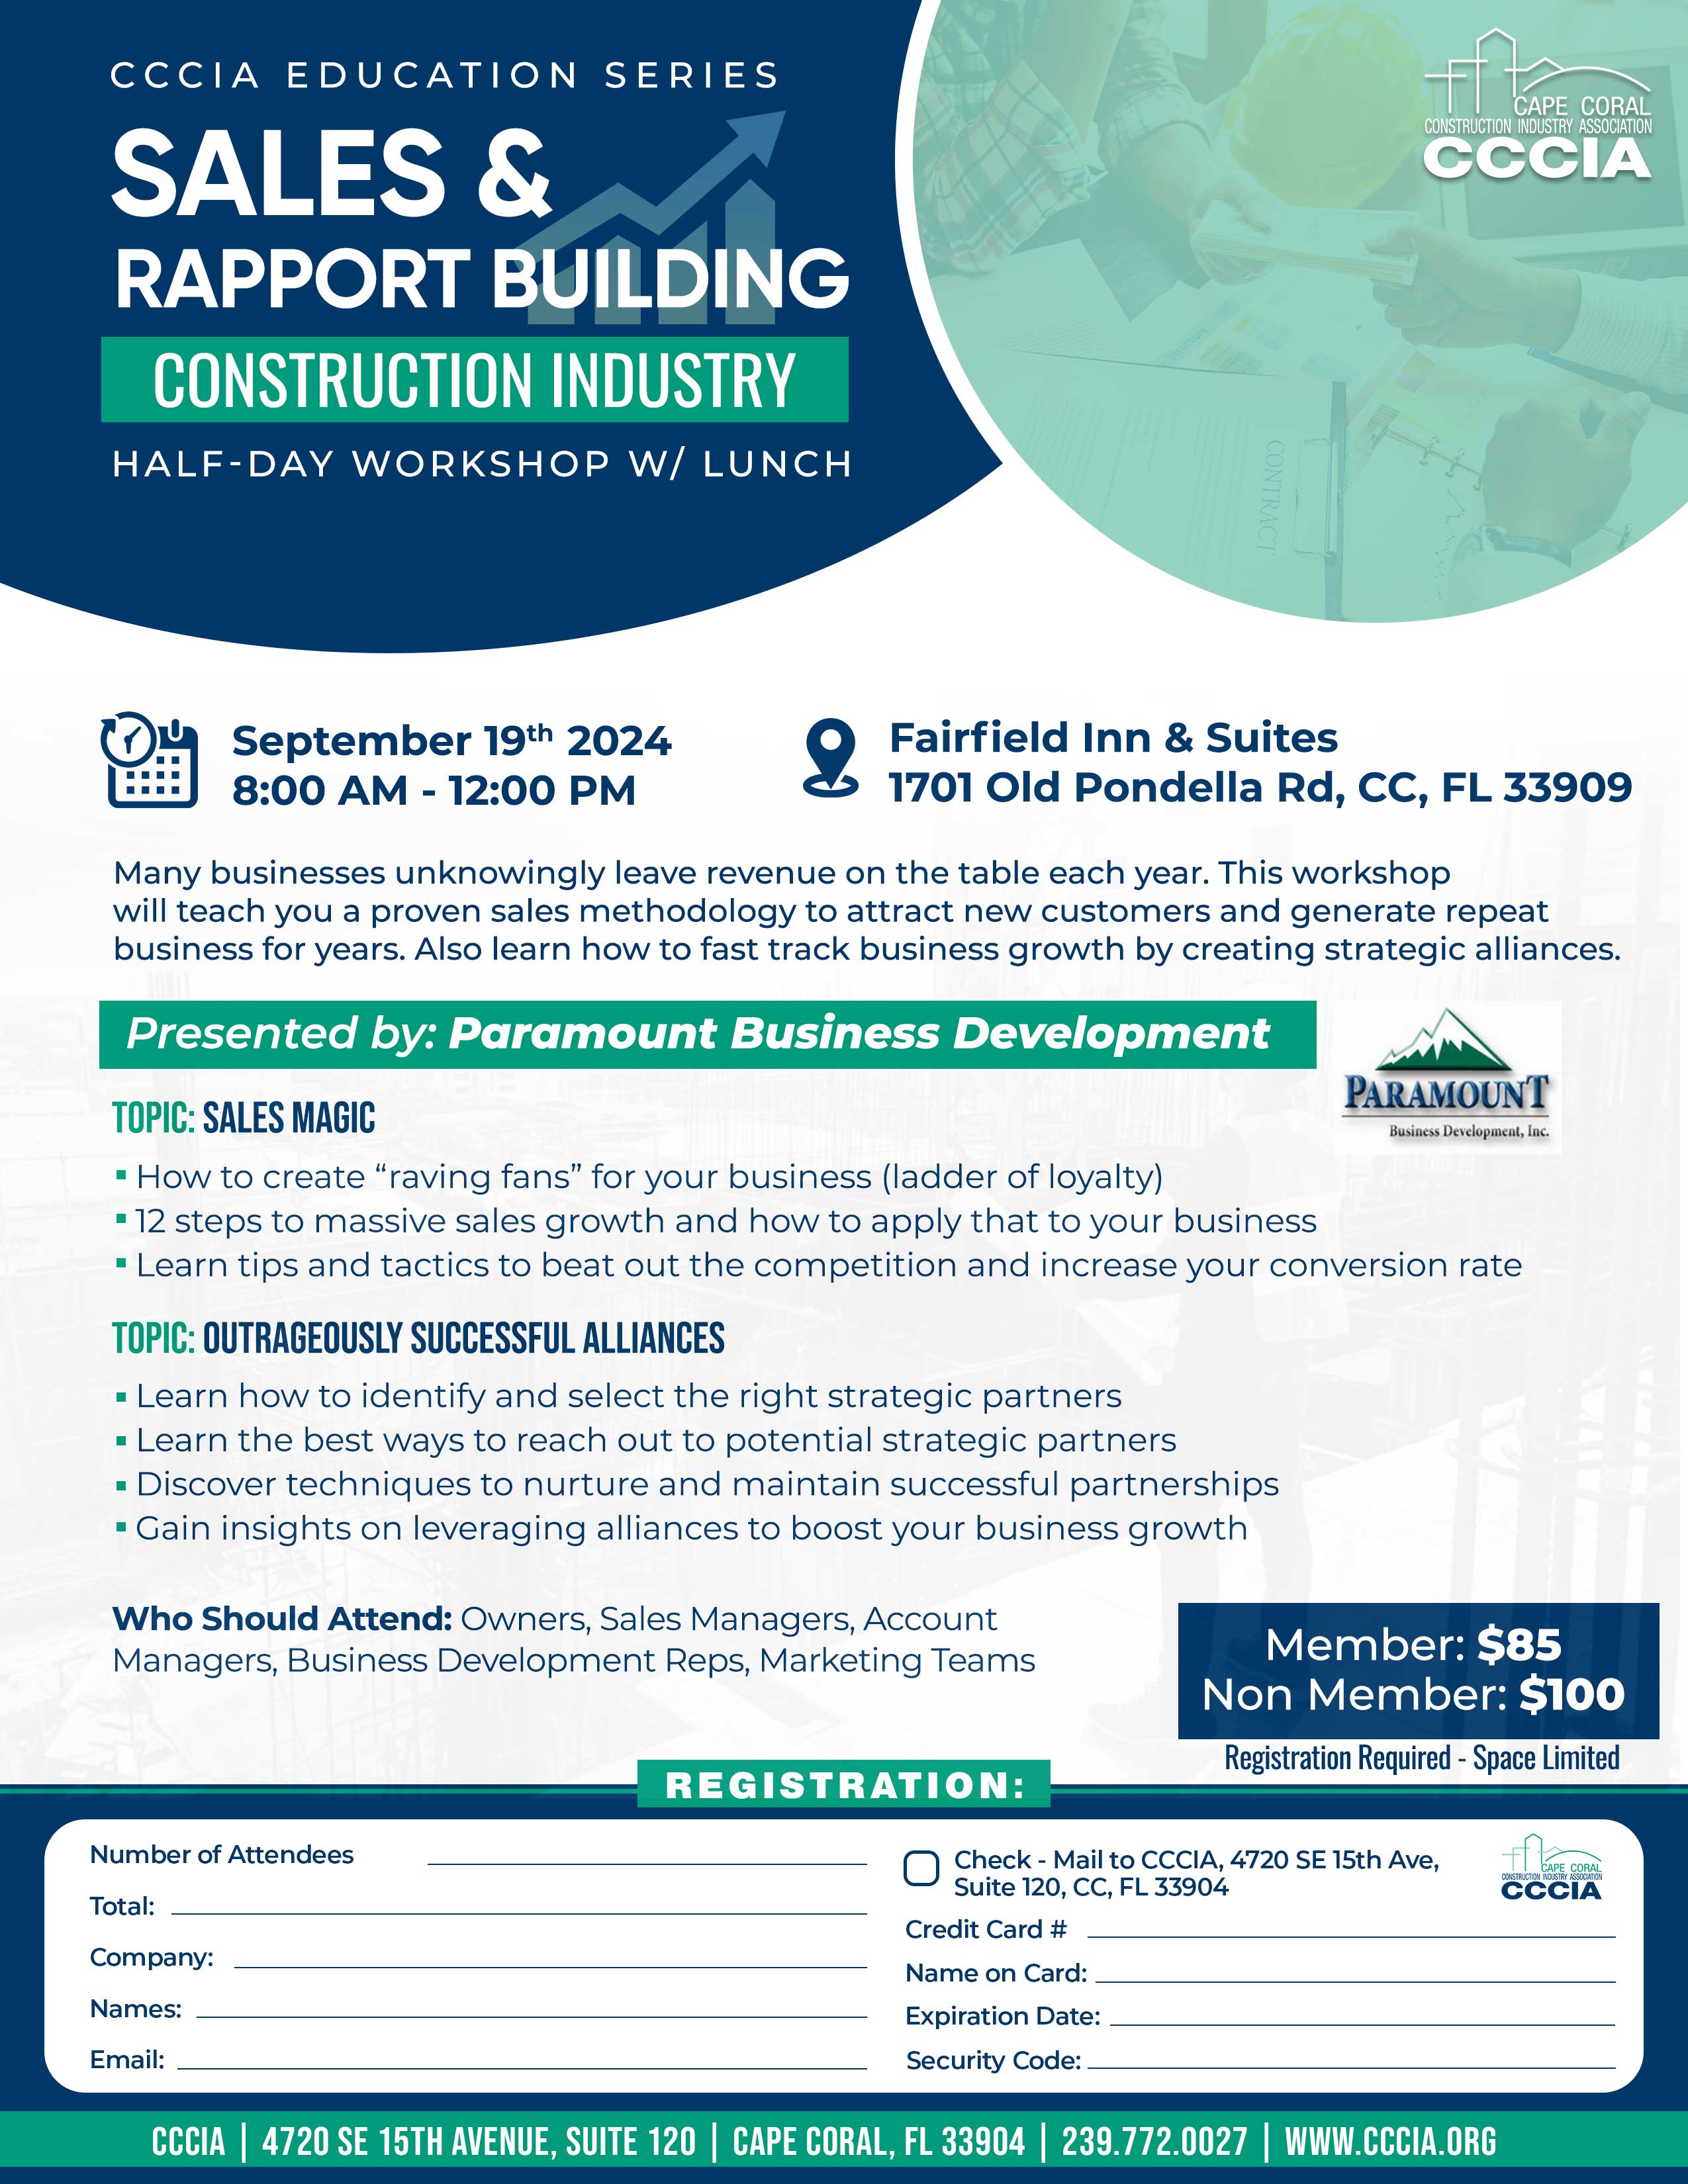 Sales-and-Rapport-Building-9.19.24